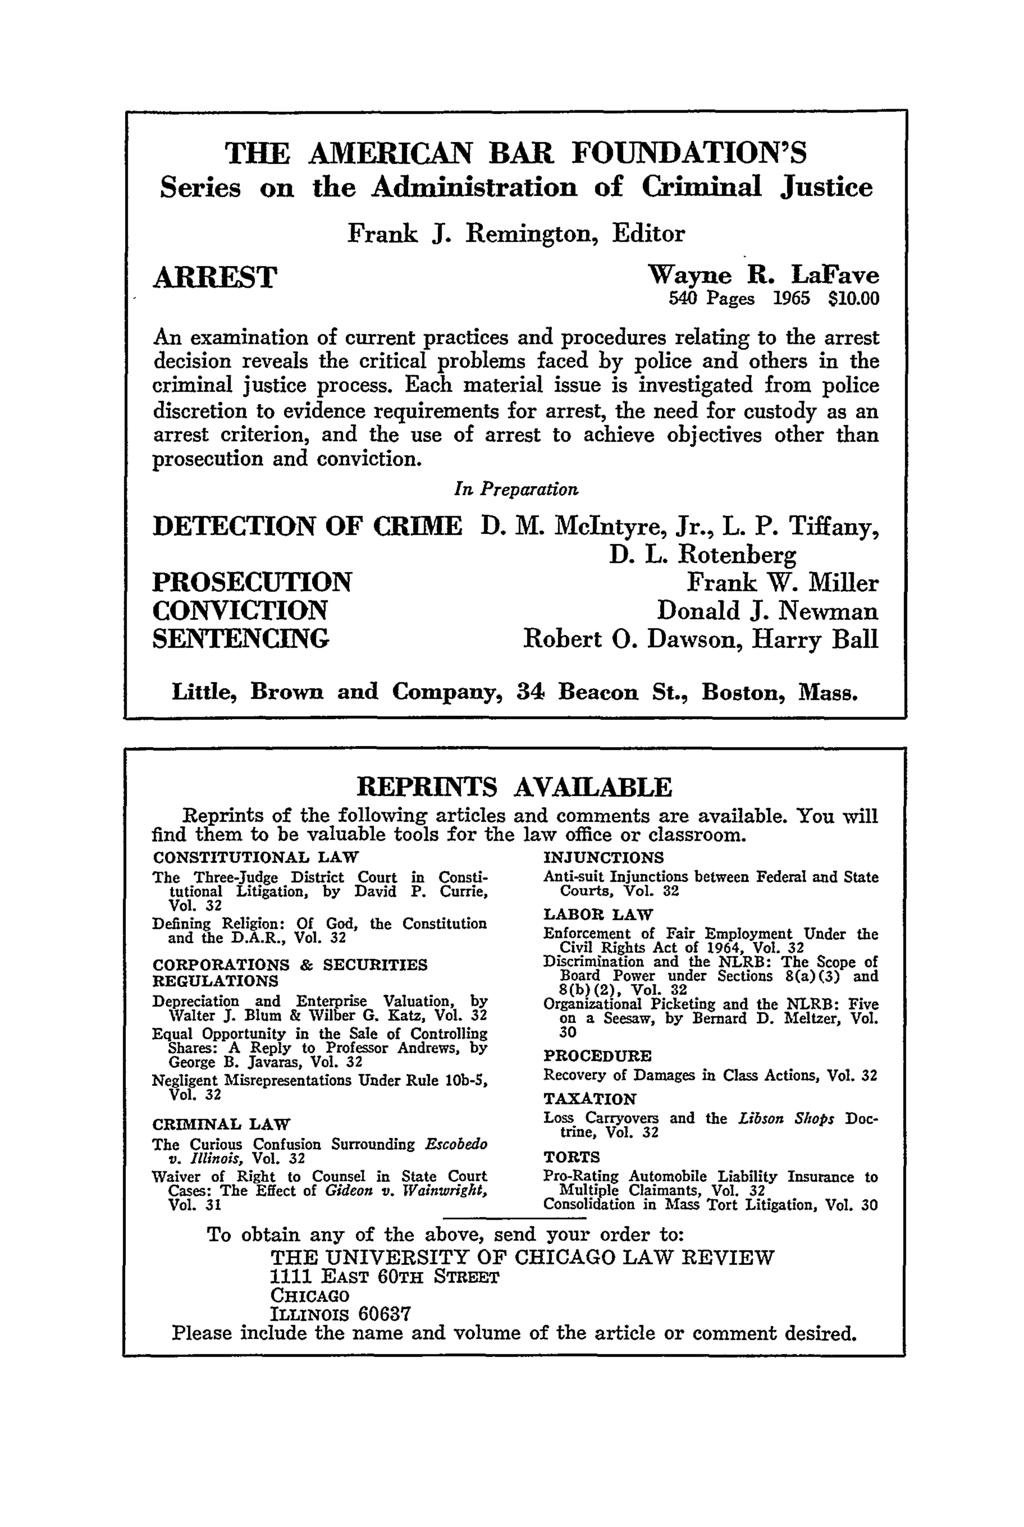 THE AMERICAN BAR FOUNDATION'S Series on the Administration of Criminal Justice ARREST Frank J. Remington, Editor Wayne R. LaFave 540 Pages 1965 $10.